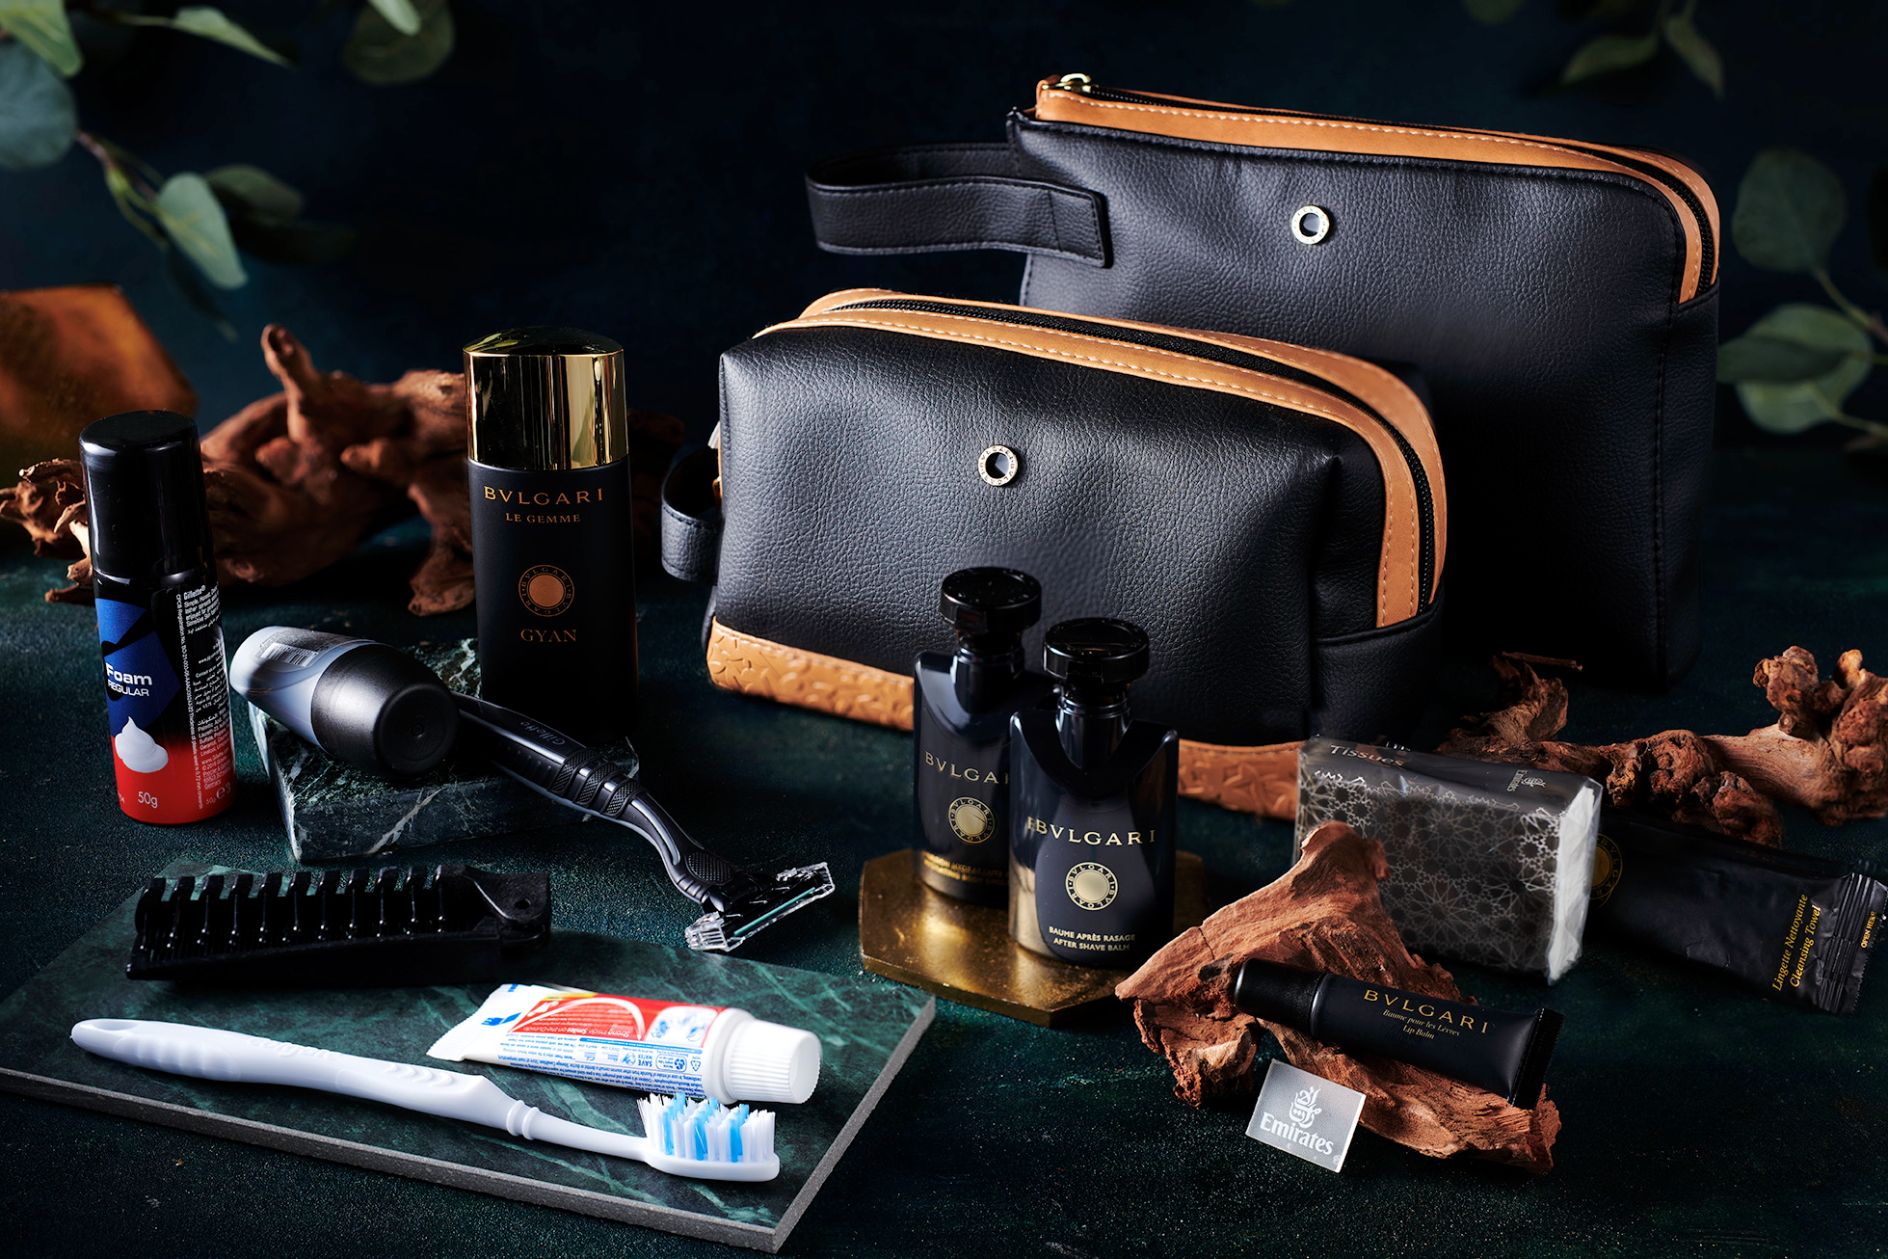 Emirates' new First Class Bvlgari amenity kits. Click to enlarge.